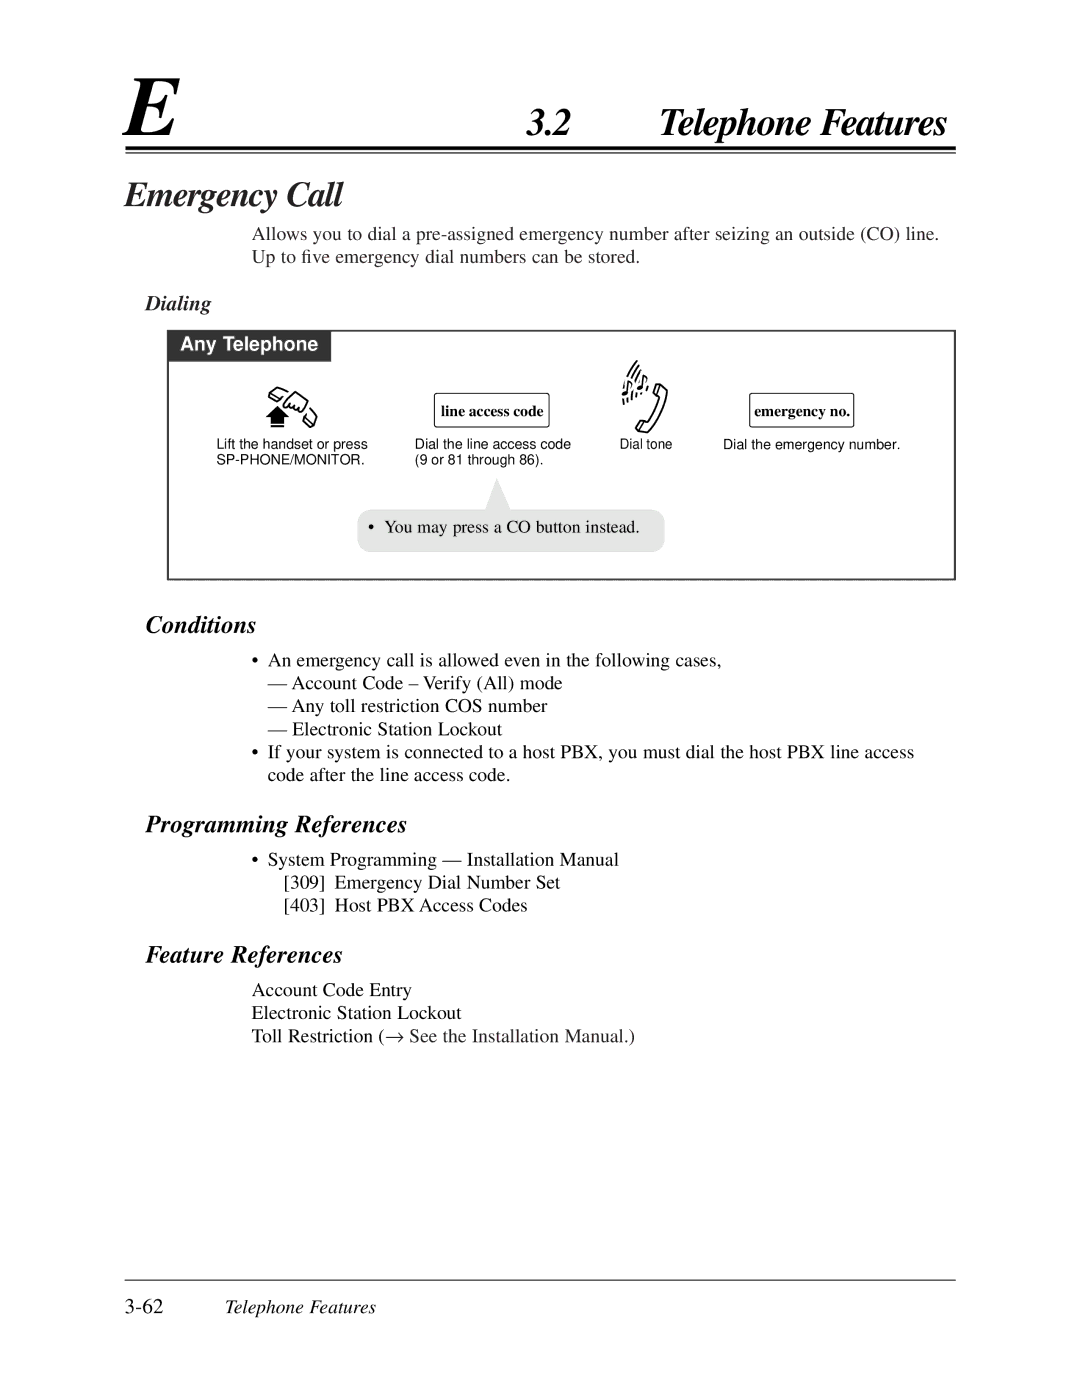 Panasonic KX-TA624 user manual Emergency Call, Dialing, 62Telephone Features, Line access code Emergency no 